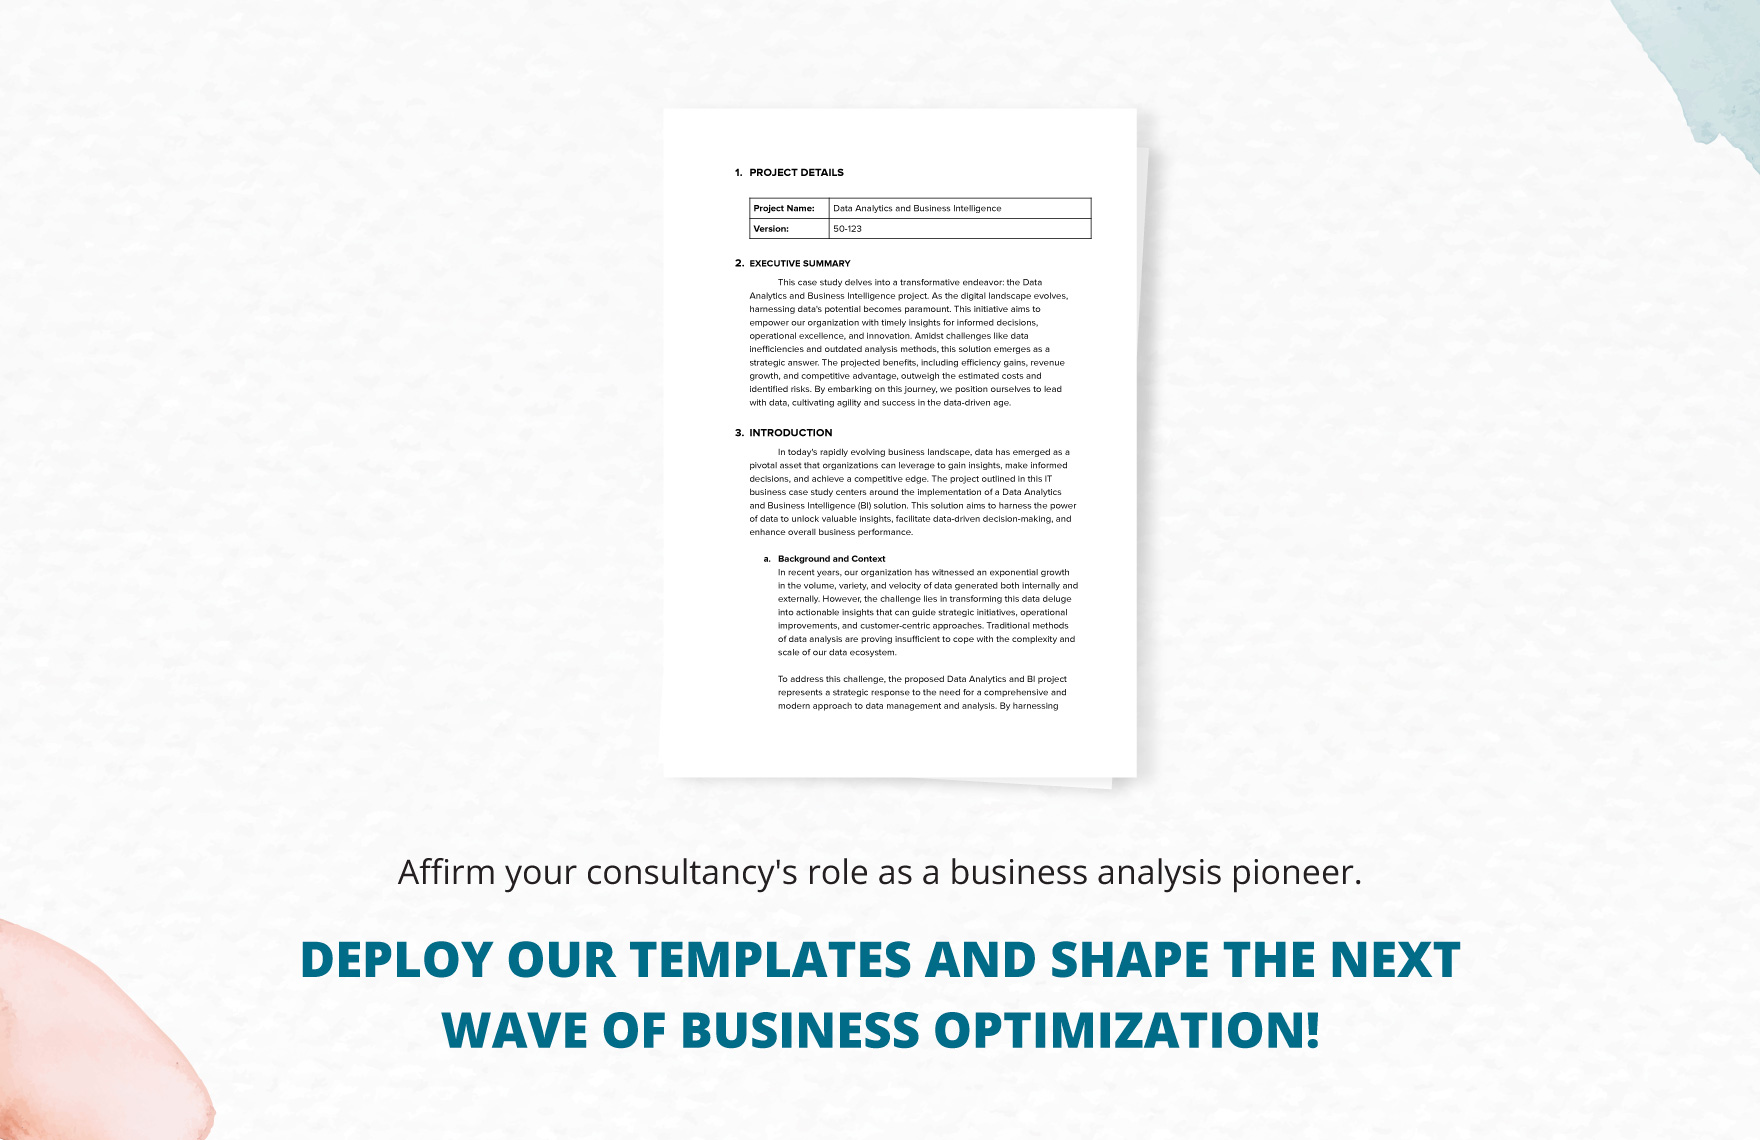 IT Business Case Study Template